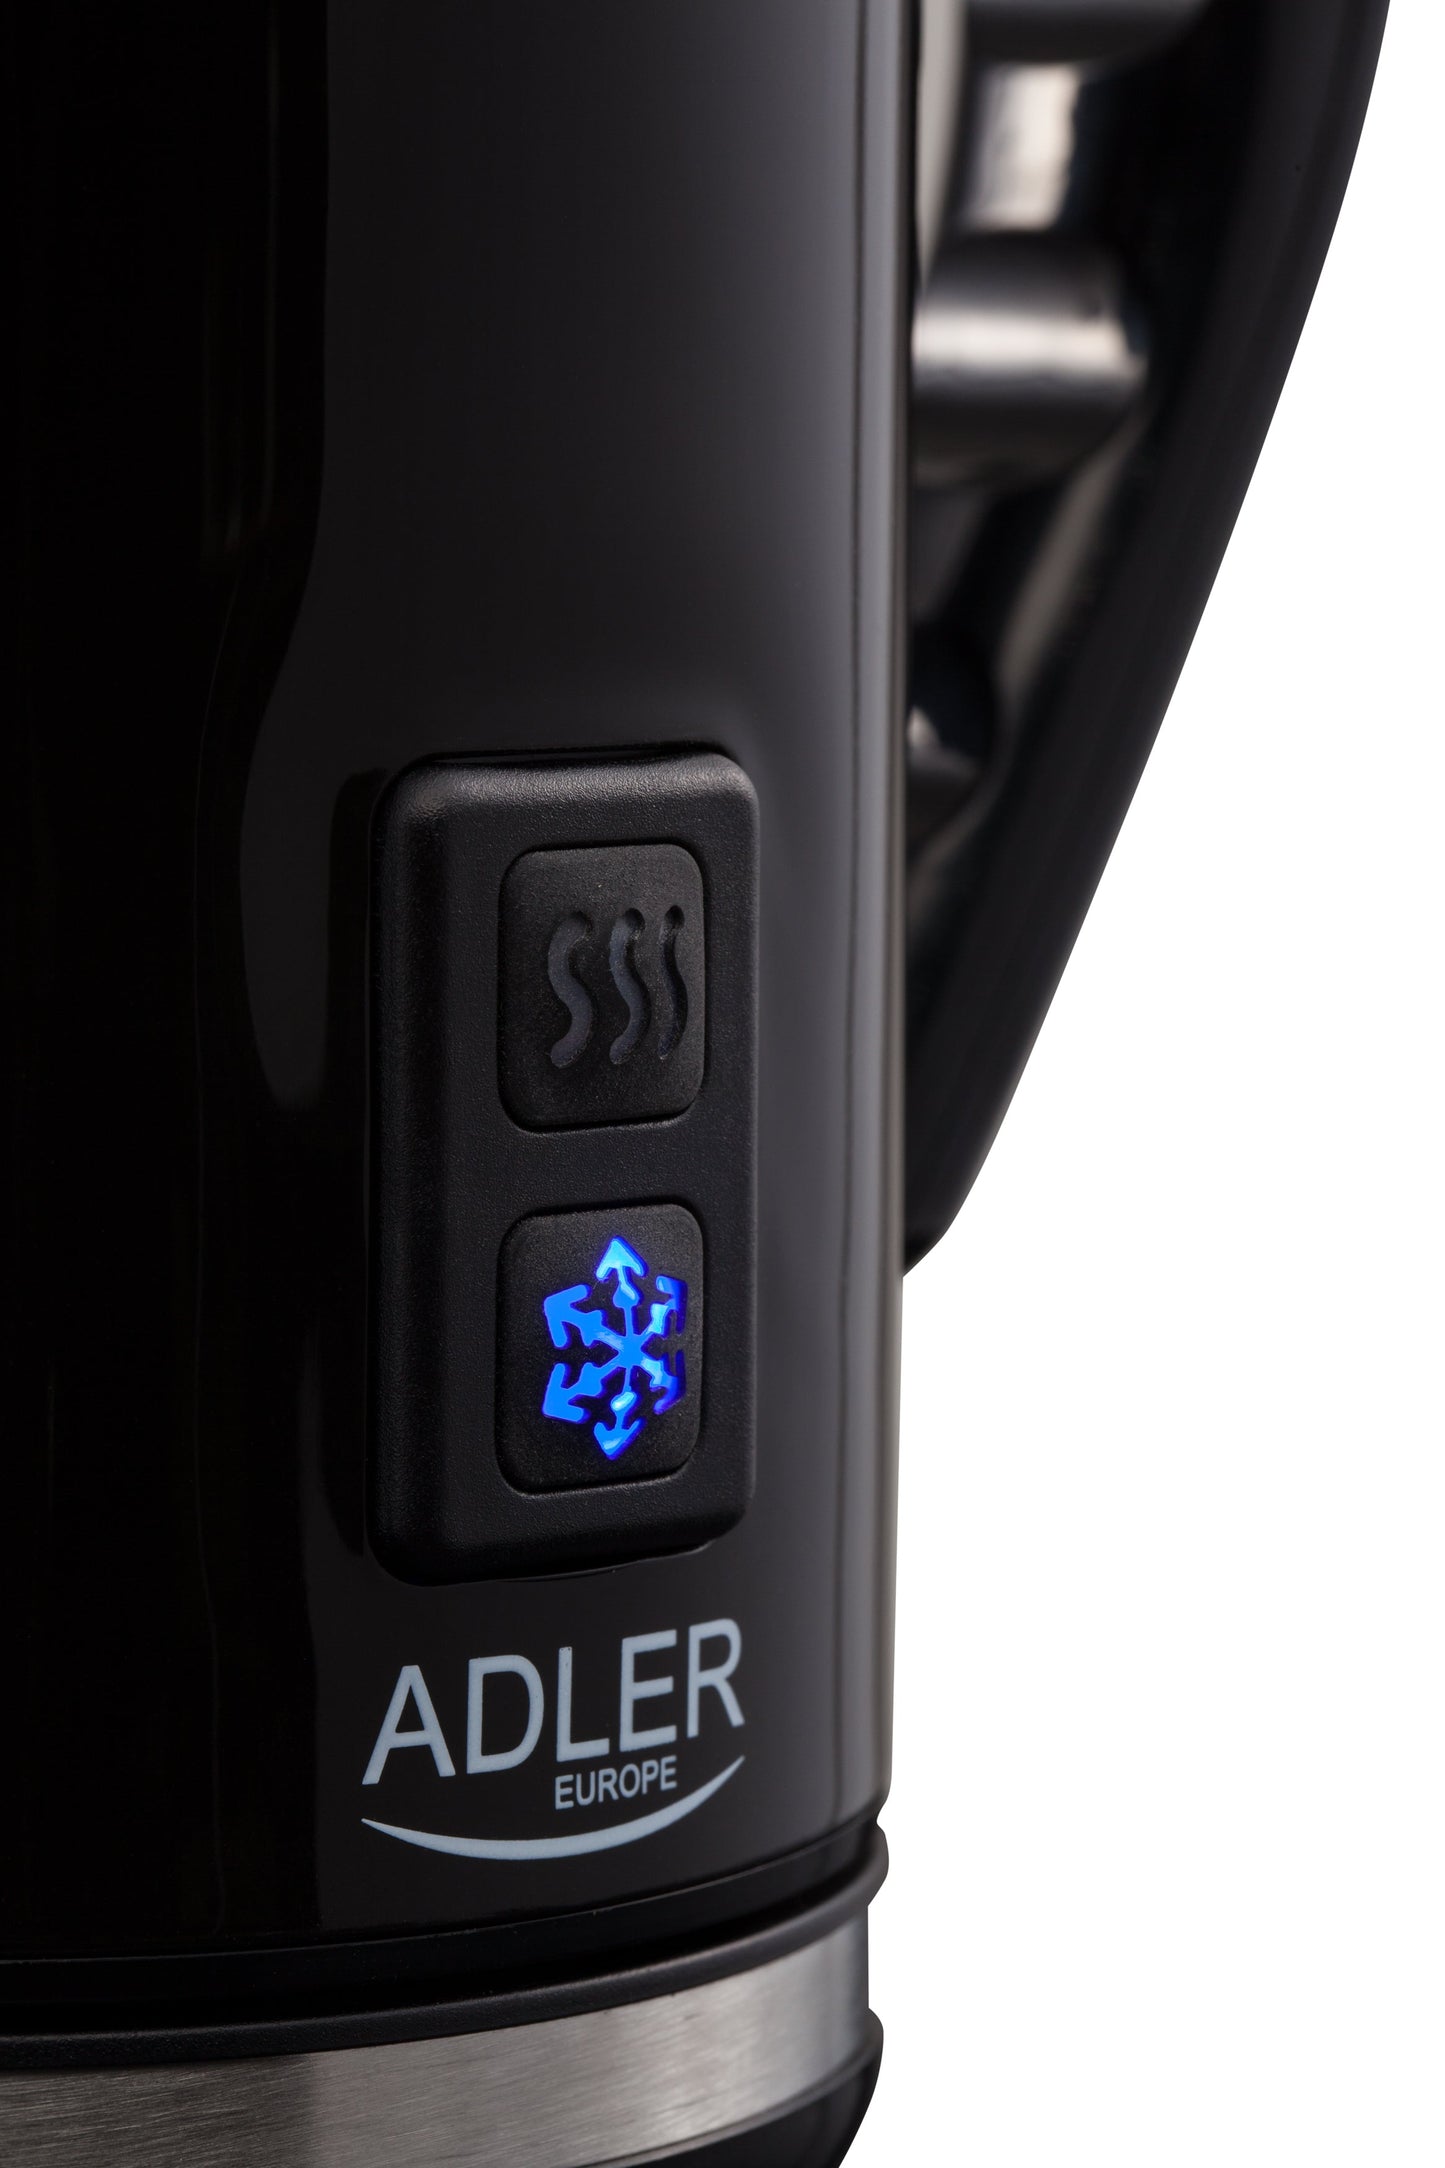 ADLER MILK FROTHER AD4478